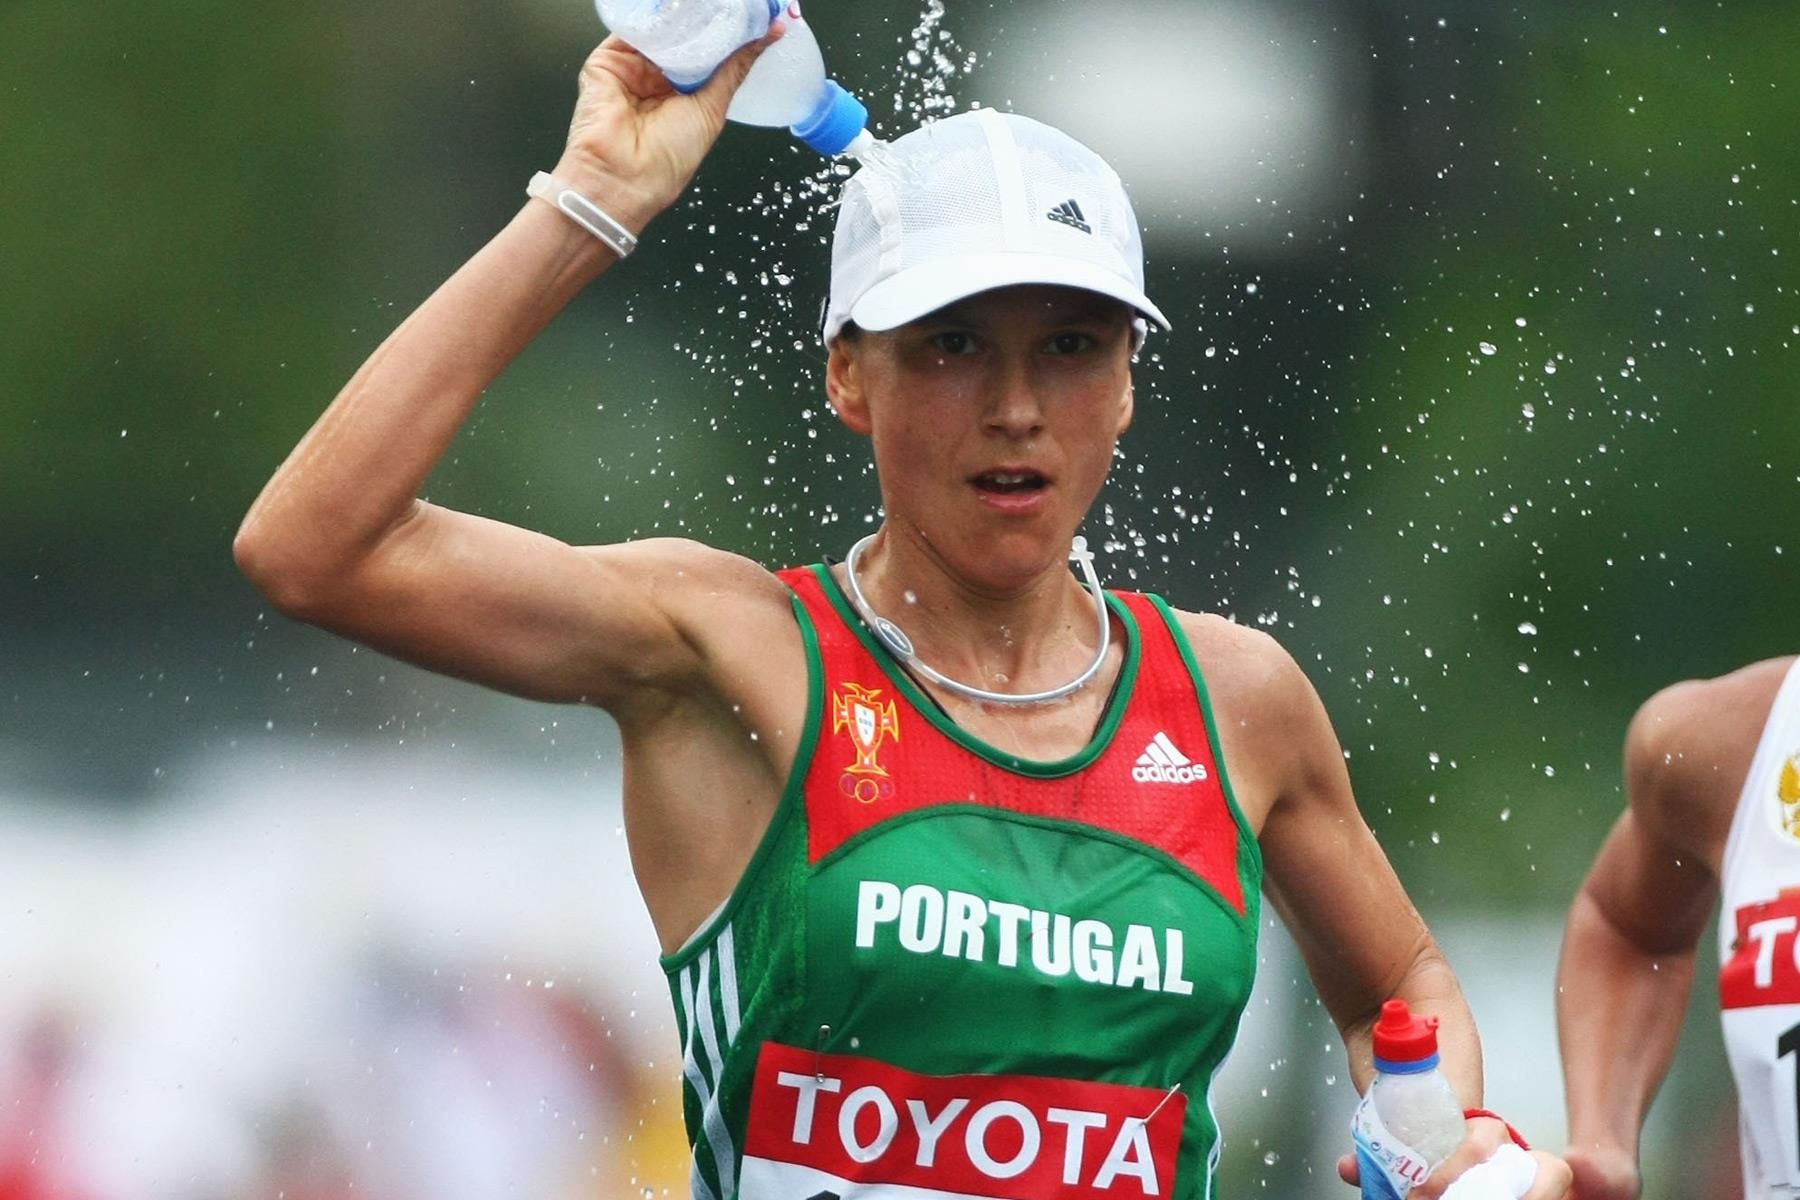 Portuguese race walker Susana Feitor at the IAAF World Championships